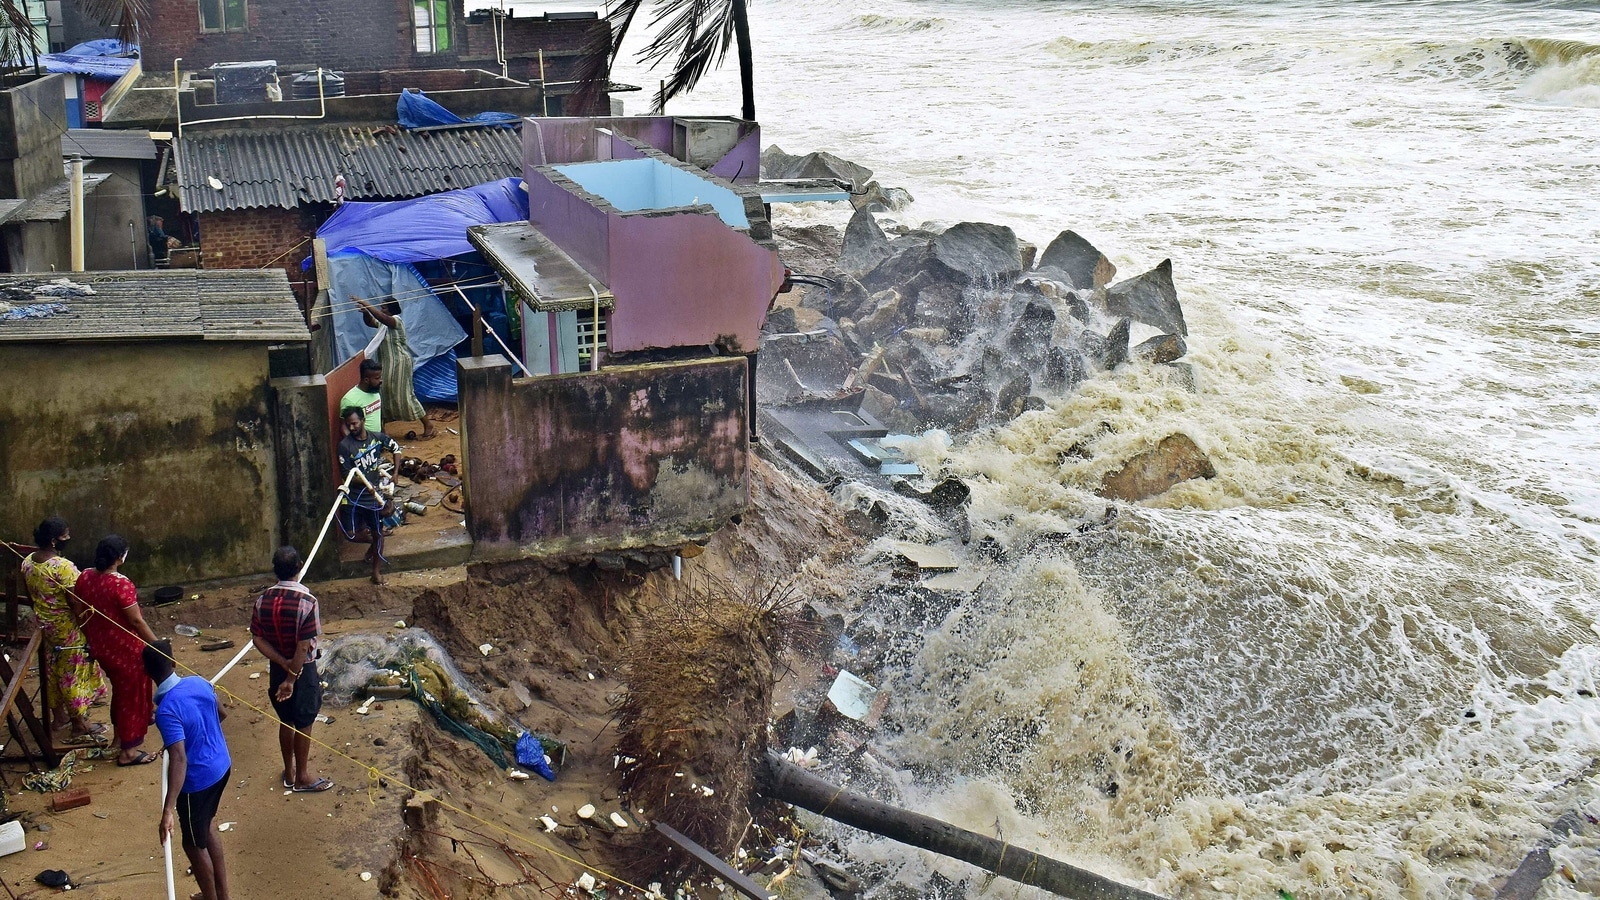 Cyclone Tauktae: 98 villages affected in Karnataka, 4 human lives lost ...